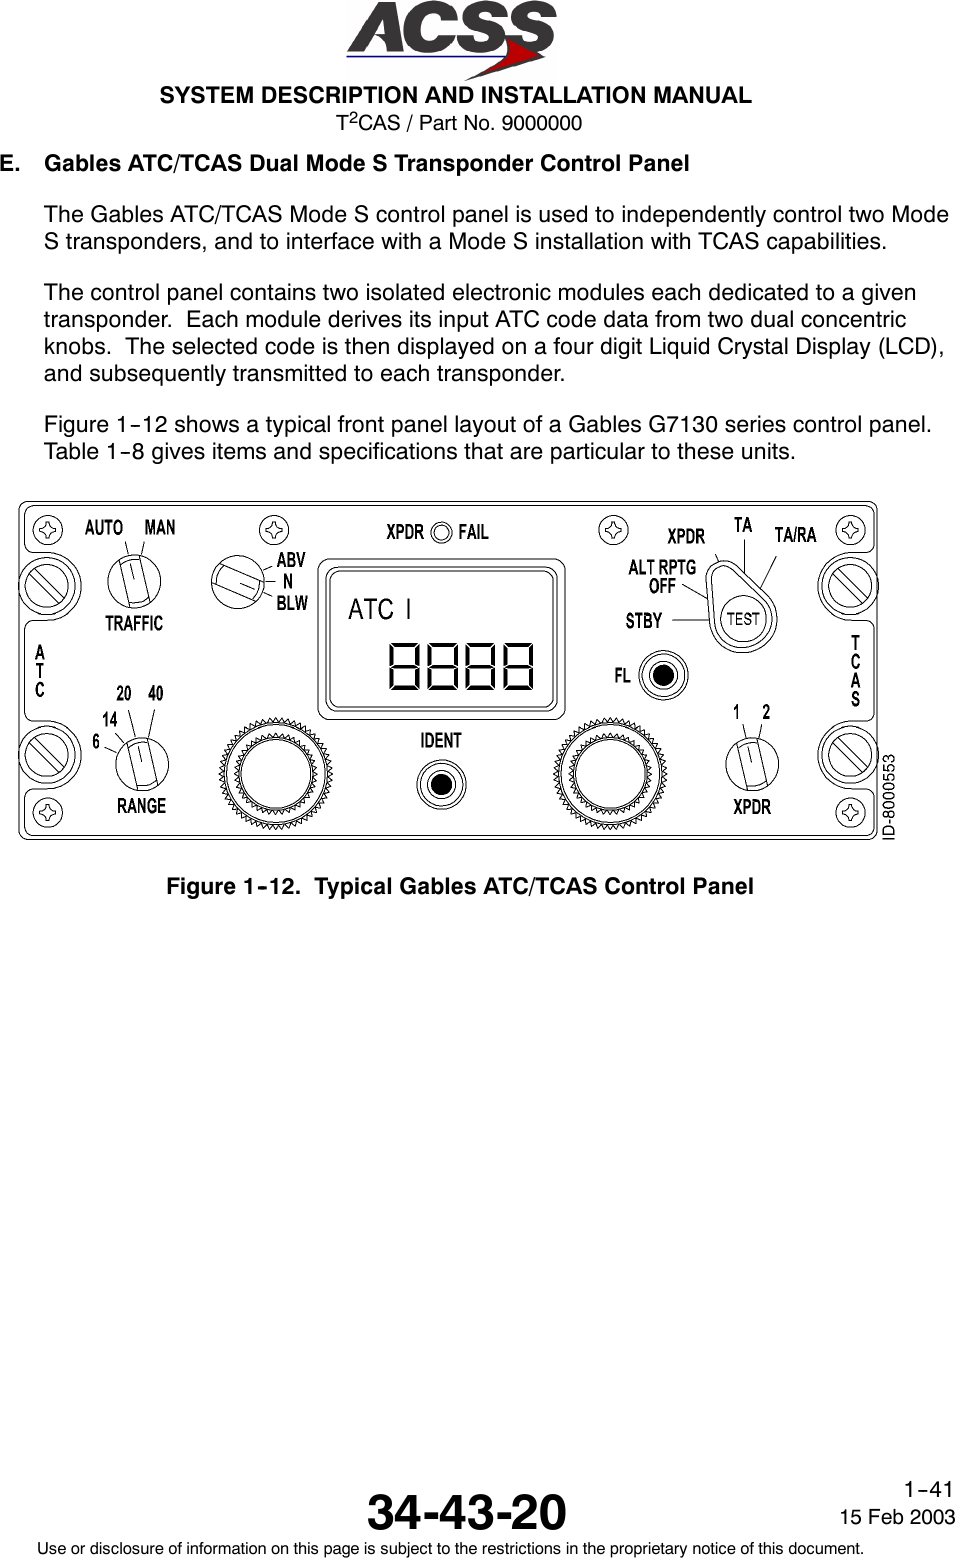 T2CAS / Part No. 9000000SYSTEM DESCRIPTION AND INSTALLATION MANUAL34-43-20 15 Feb 2003Use or disclosure of information on this page is subject to the restrictions in the proprietary notice of this document.1--41E. Gables ATC/TCAS Dual Mode S Transponder Control PanelThe Gables ATC/TCAS Mode S control panel is used to independently control two ModeS transponders, and to interface with a Mode S installation with TCAS capabilities.The control panel contains two isolated electronic modules each dedicated to a giventransponder. Each module derives its input ATC code data from two dual concentricknobs. The selected code is then displayed on a four digit Liquid Crystal Display (LCD),and subsequently transmitted to each transponder.Figure 1--12 shows a typical front panel layout of a Gables G7130 series control panel.Table 1--8 gives items and specifications that are particular to these units.Figure 1--12. Typical Gables ATC/TCAS Control Panel